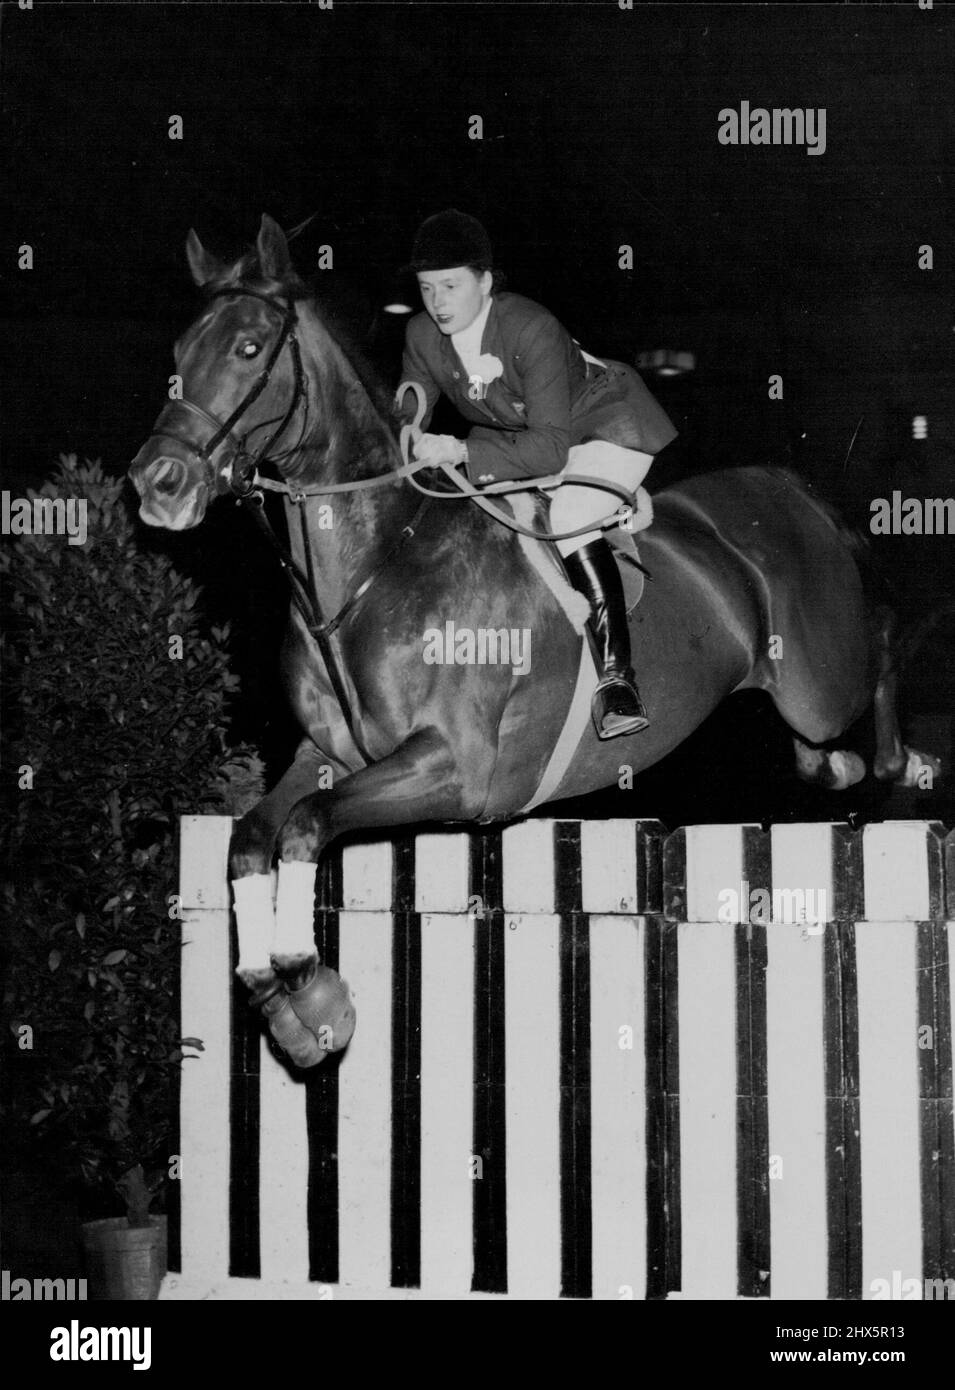 Well Clear -- Miss Pat Smythe, the popular international show jumper, takes 'Prince Hal' over the sleepers during yesterday's jumping at the horse of the year show at Harringay. Pat finished second on Prince Hal in the 'Horse of the year' competition, won by Mr. Ted Williams on 'Sunday Morning'. October 07, 1955. (Photo by Paul Popper Ltd.). Stock Photo